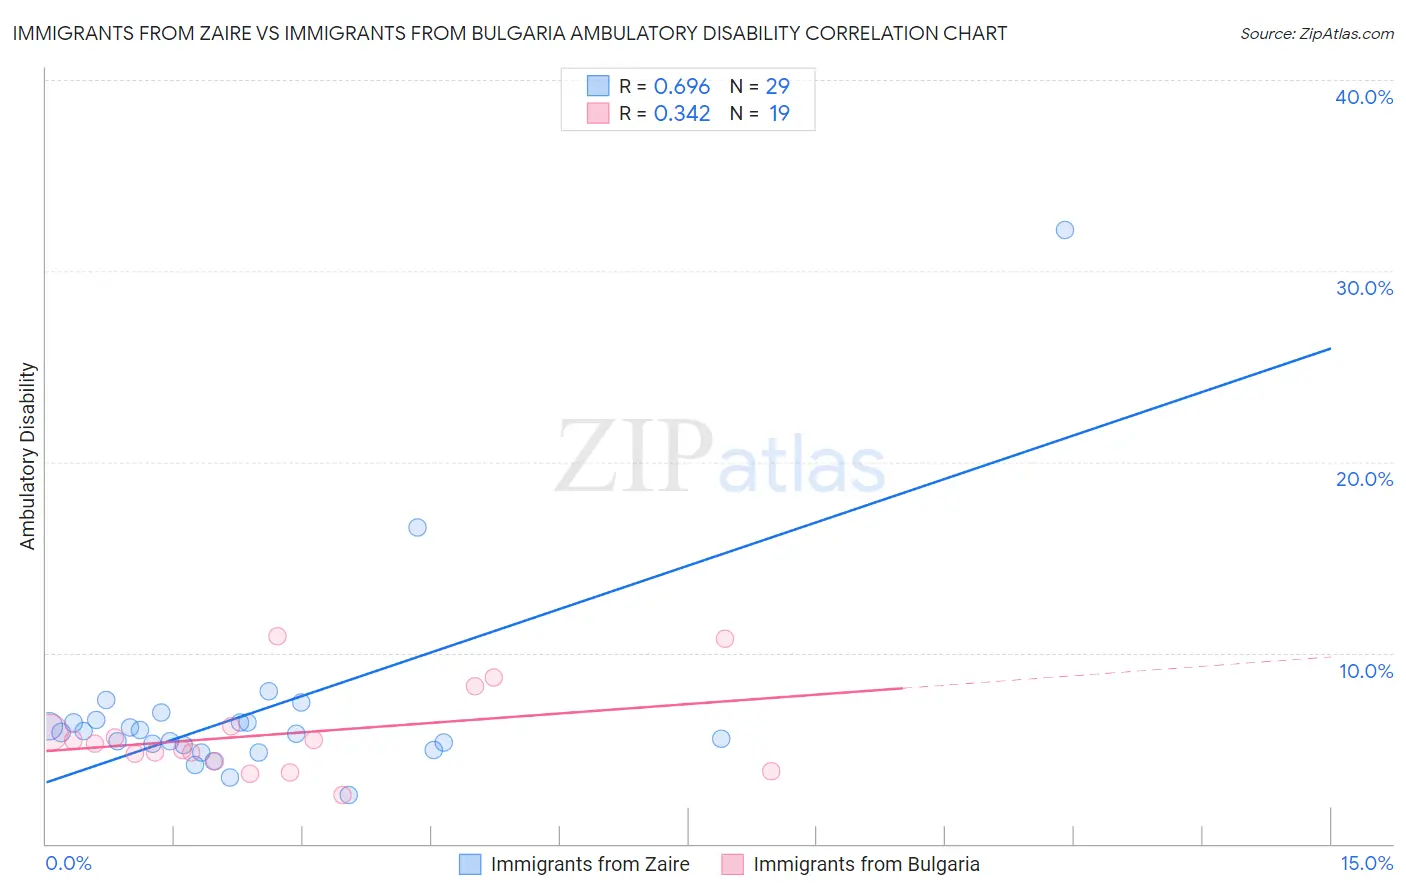 Immigrants from Zaire vs Immigrants from Bulgaria Ambulatory Disability